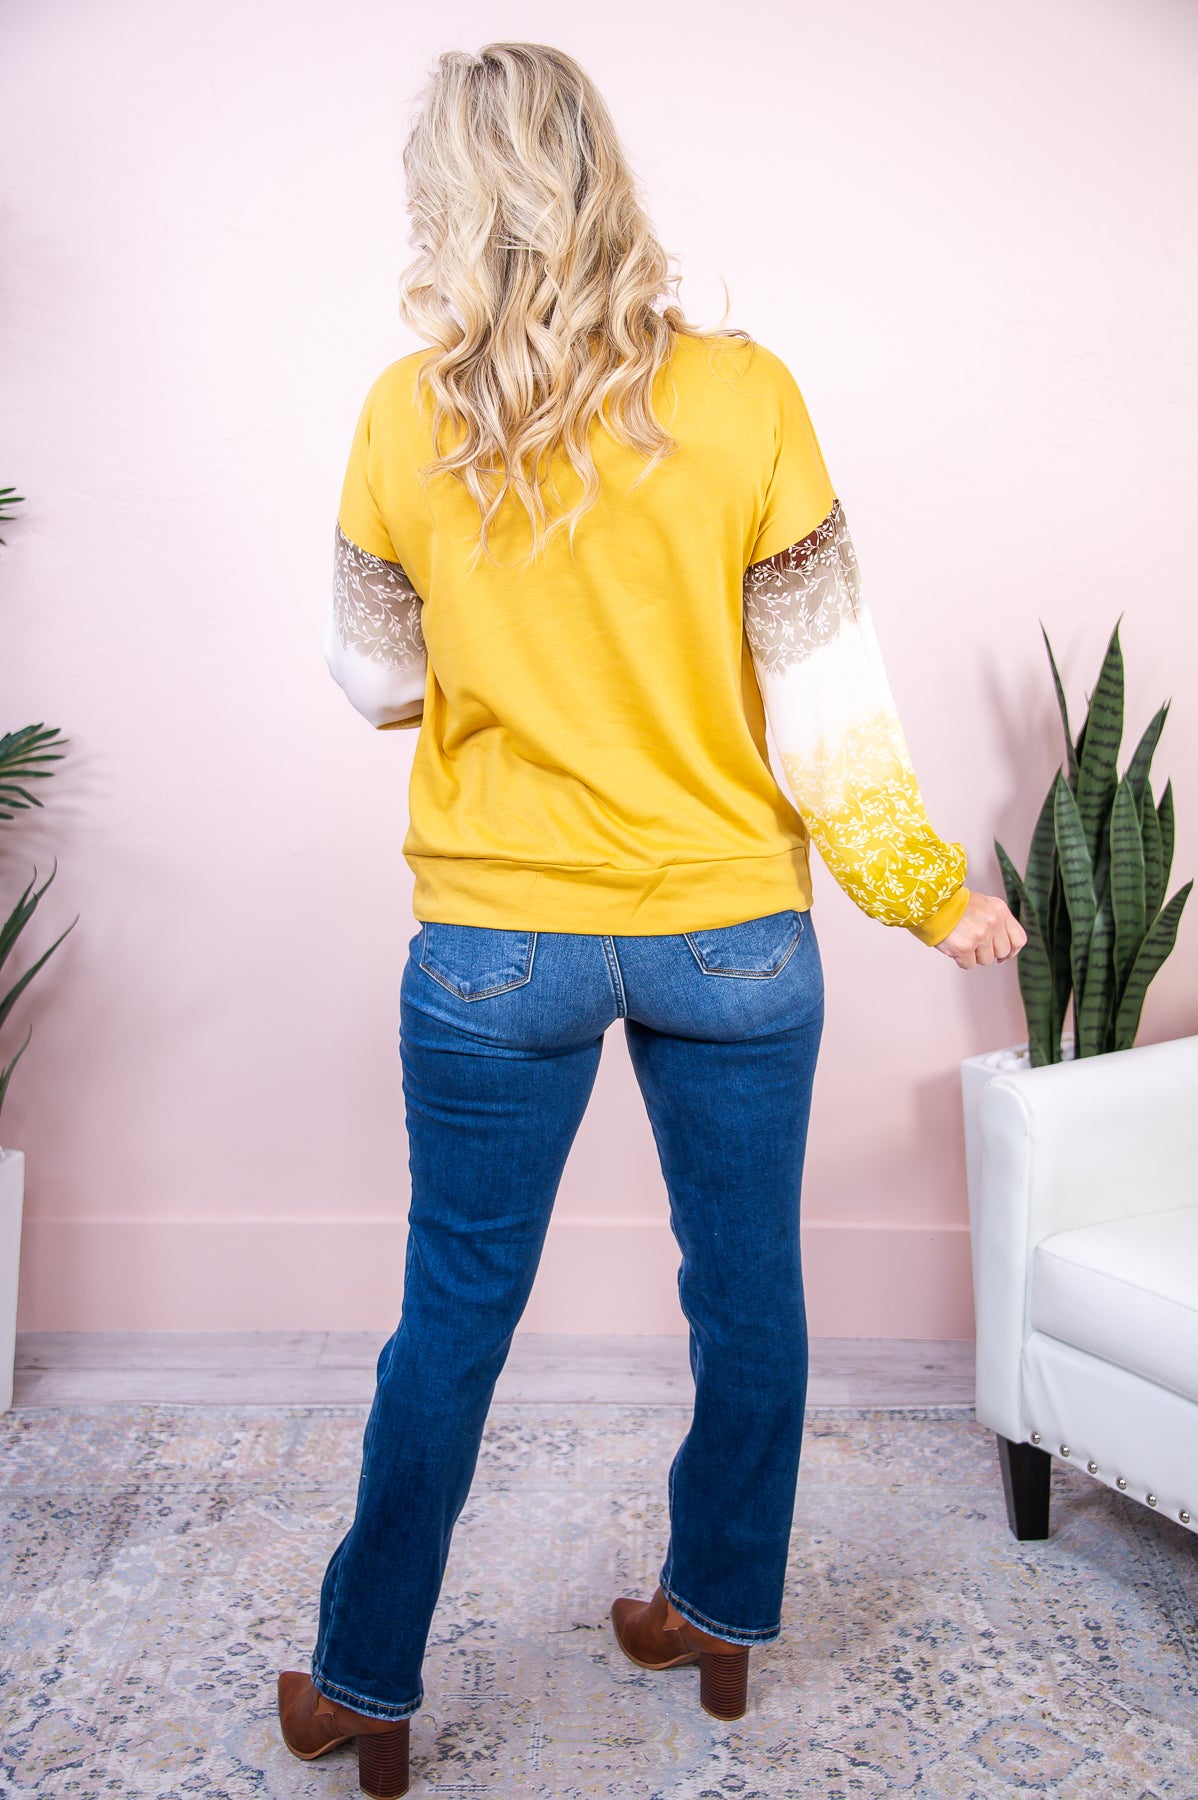 Made You A Believer Mustard/Multi Color Floral Ombre Top - T8152MU